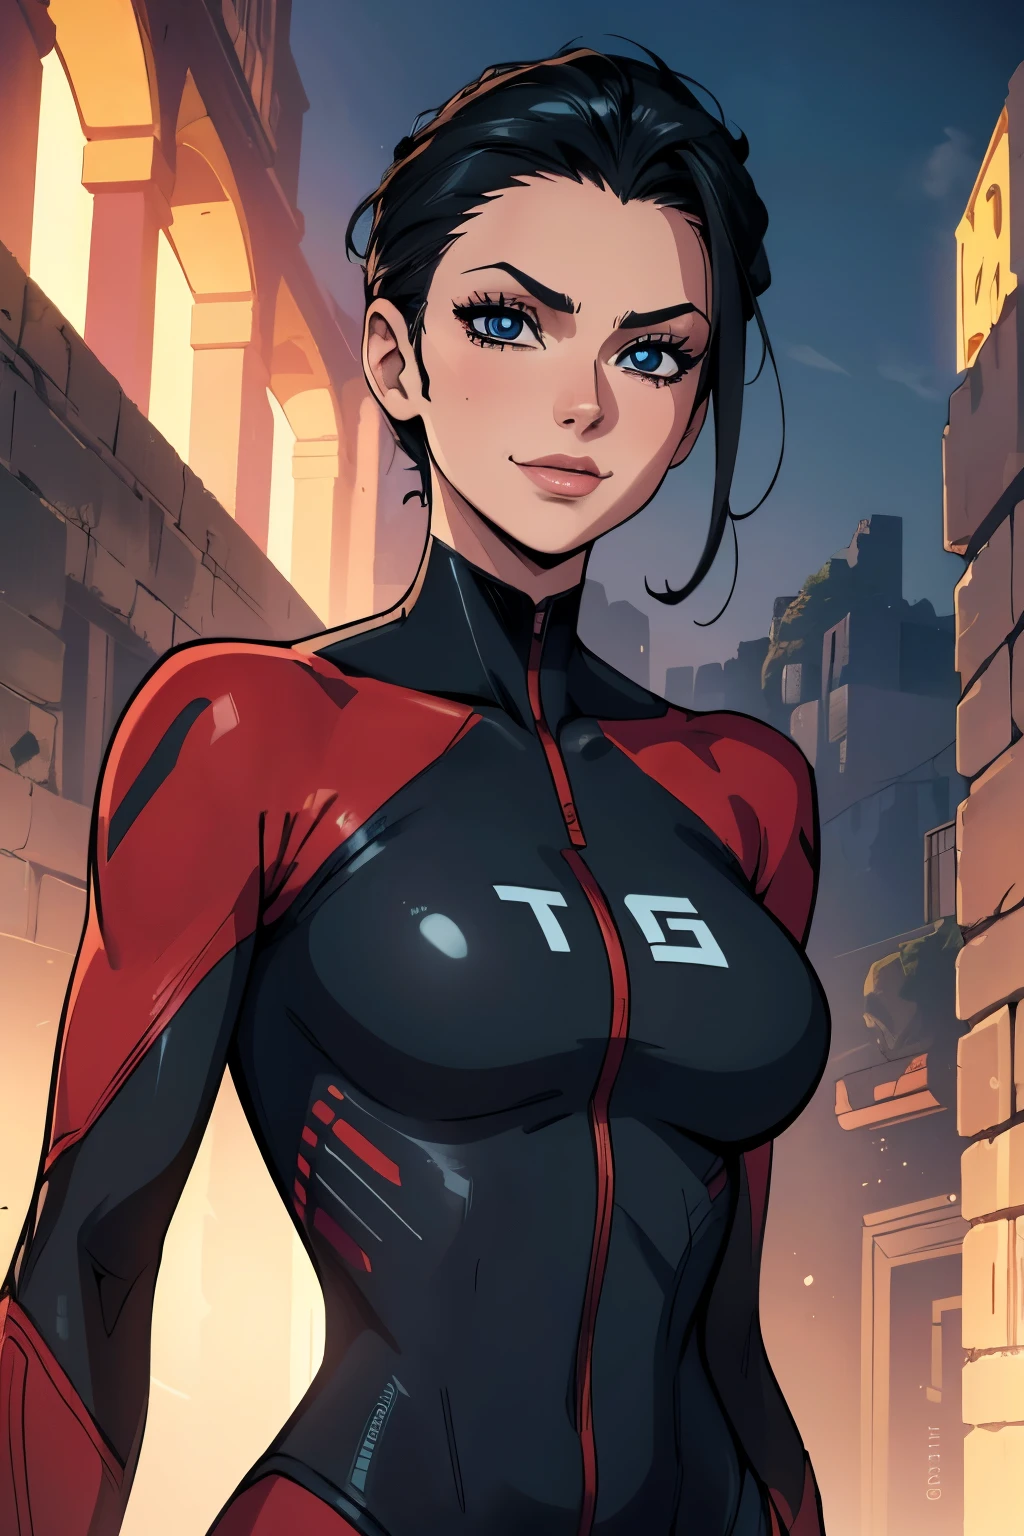 (art, Best quality, absurd, 4K, aesthetics, perfect eyes, perfect face, detailed, complex, Perfect lighting) 1 girl with fair skin, short dark hair brushed back, wears a red and black futuristic bodysuit, queen of a race alien, warrior, gentle smile